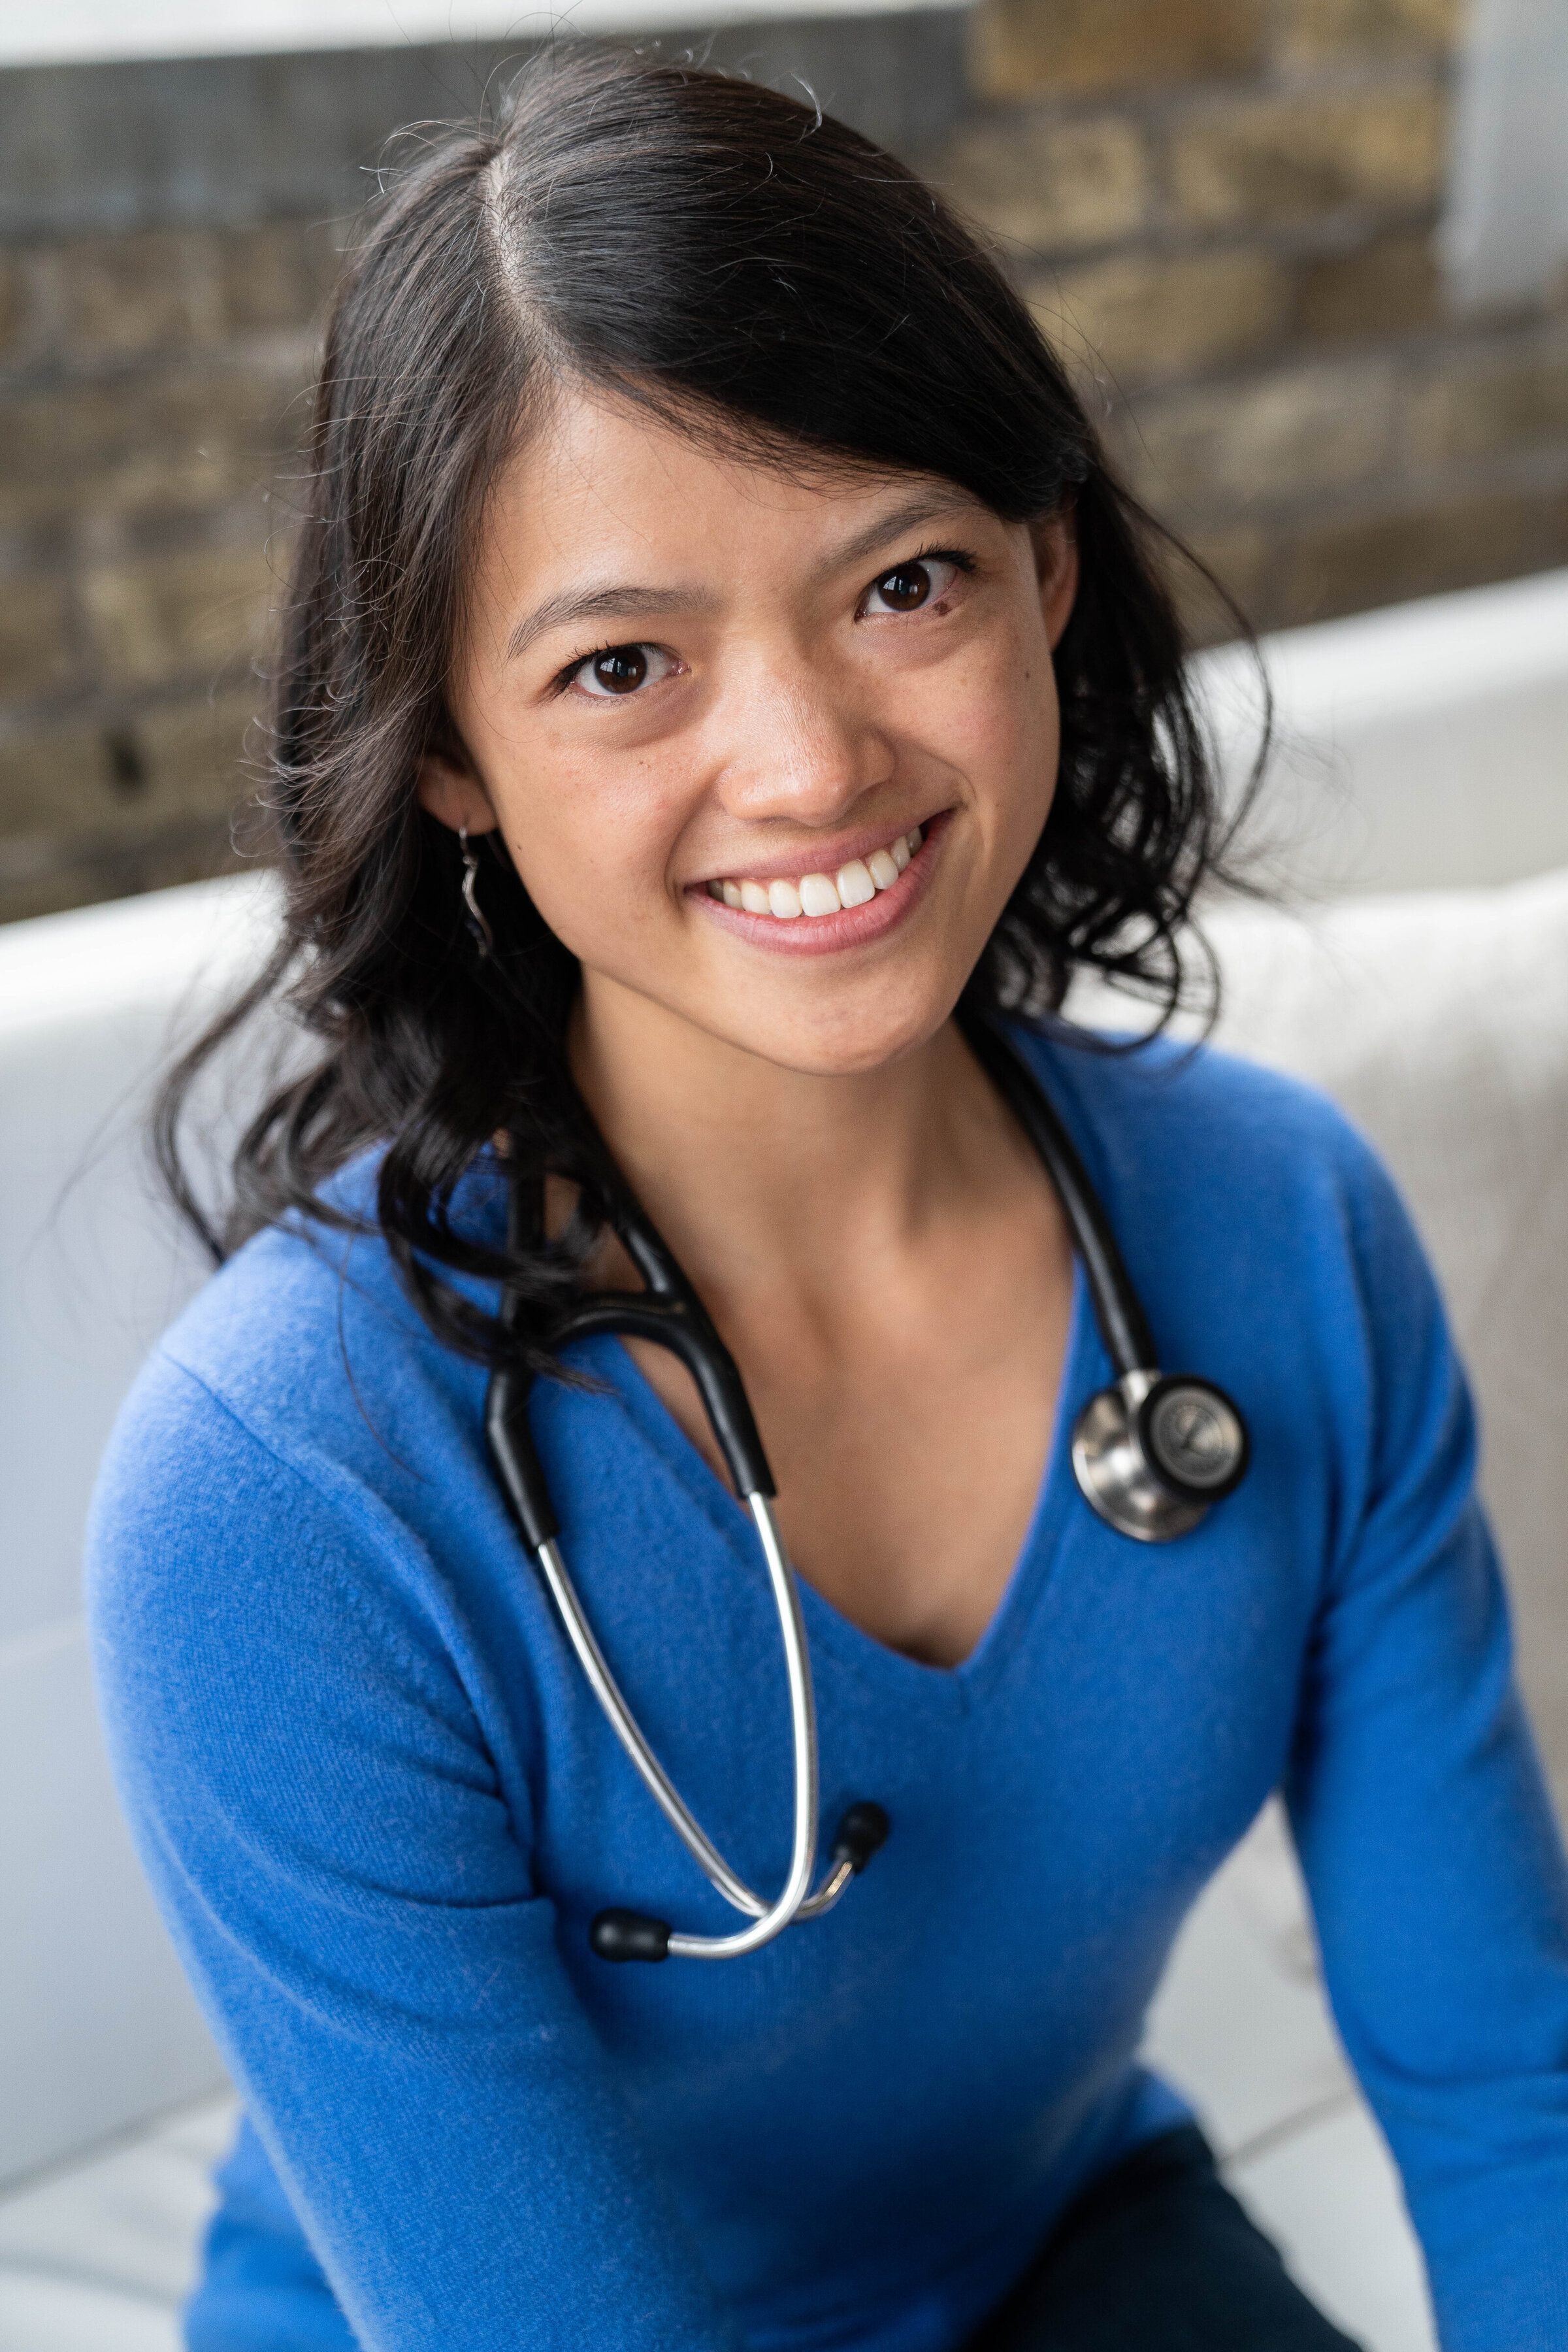 Veterinarian wearing a stethoscope around her neck smiles at the camera during her headshot photo shoot.